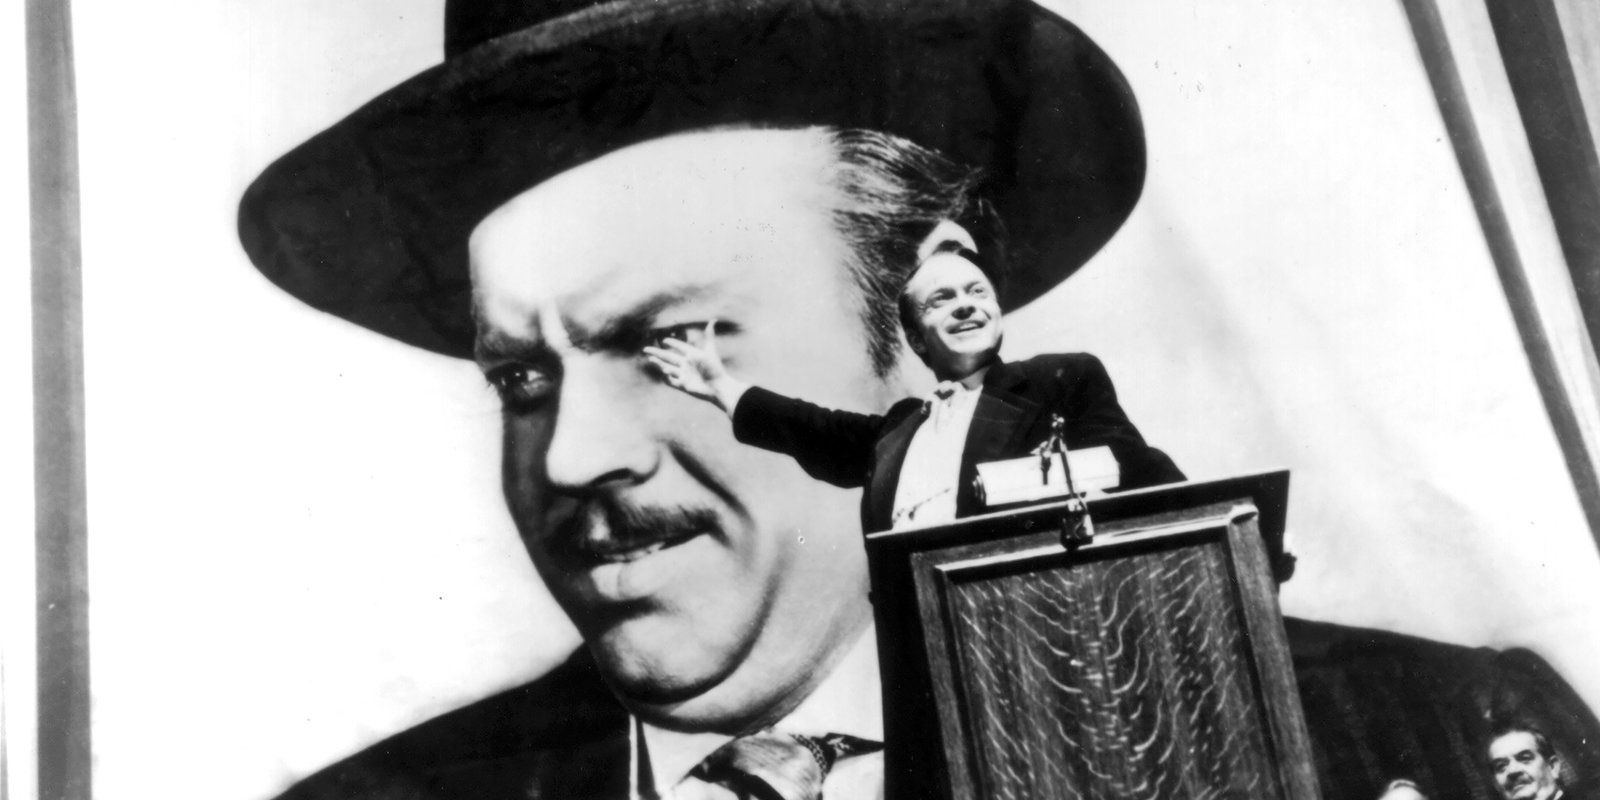 Is Citizen Kane On Netflix, Prime Or Hulu? Where To Watch Online